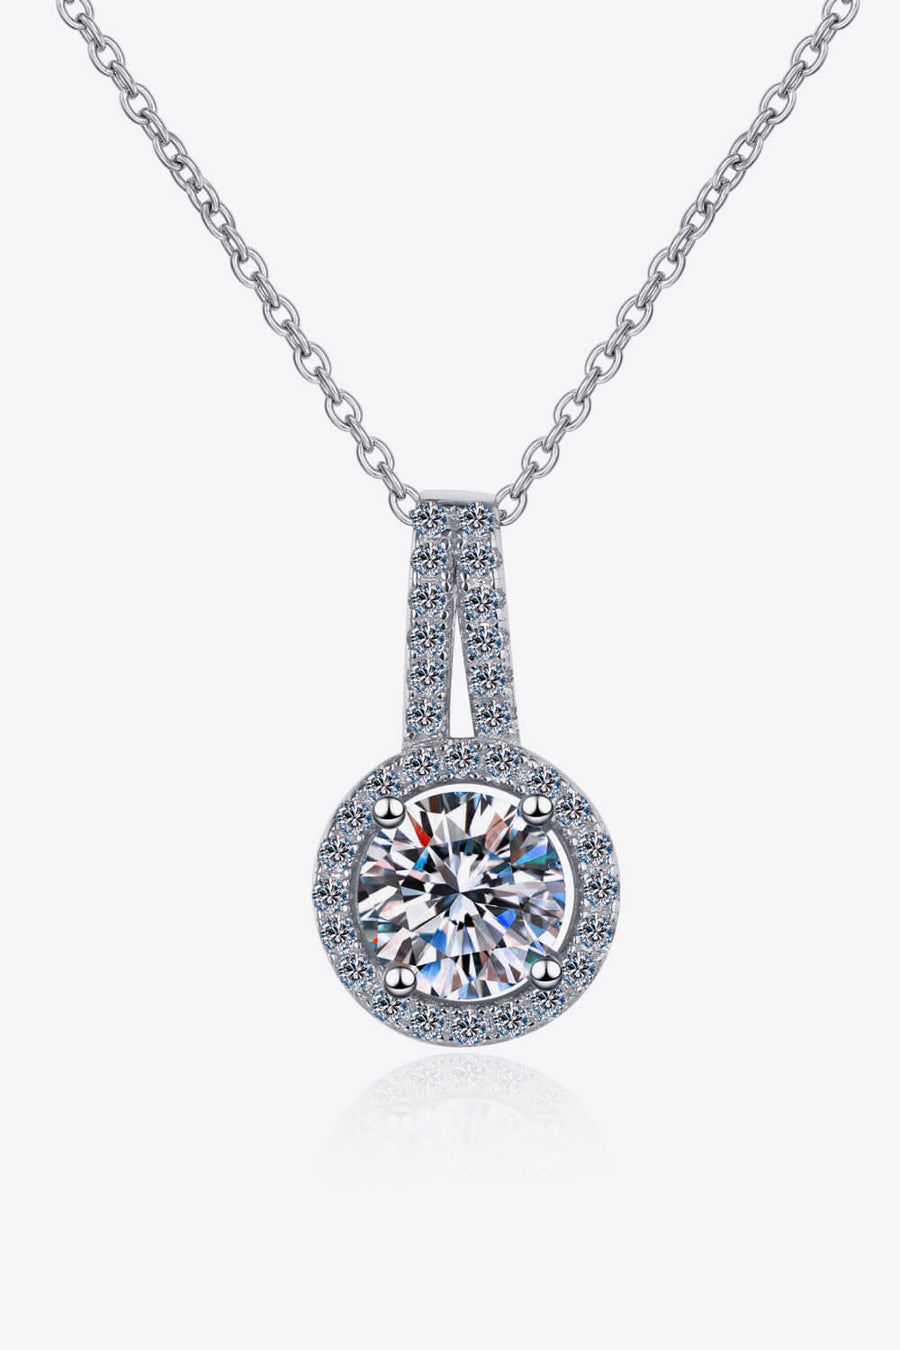 Best Diamond Necklace Jewelry Gifts for Women | 1 Carat Round Diamond Pendant Chain Necklace - Build You Up  | MASON New York